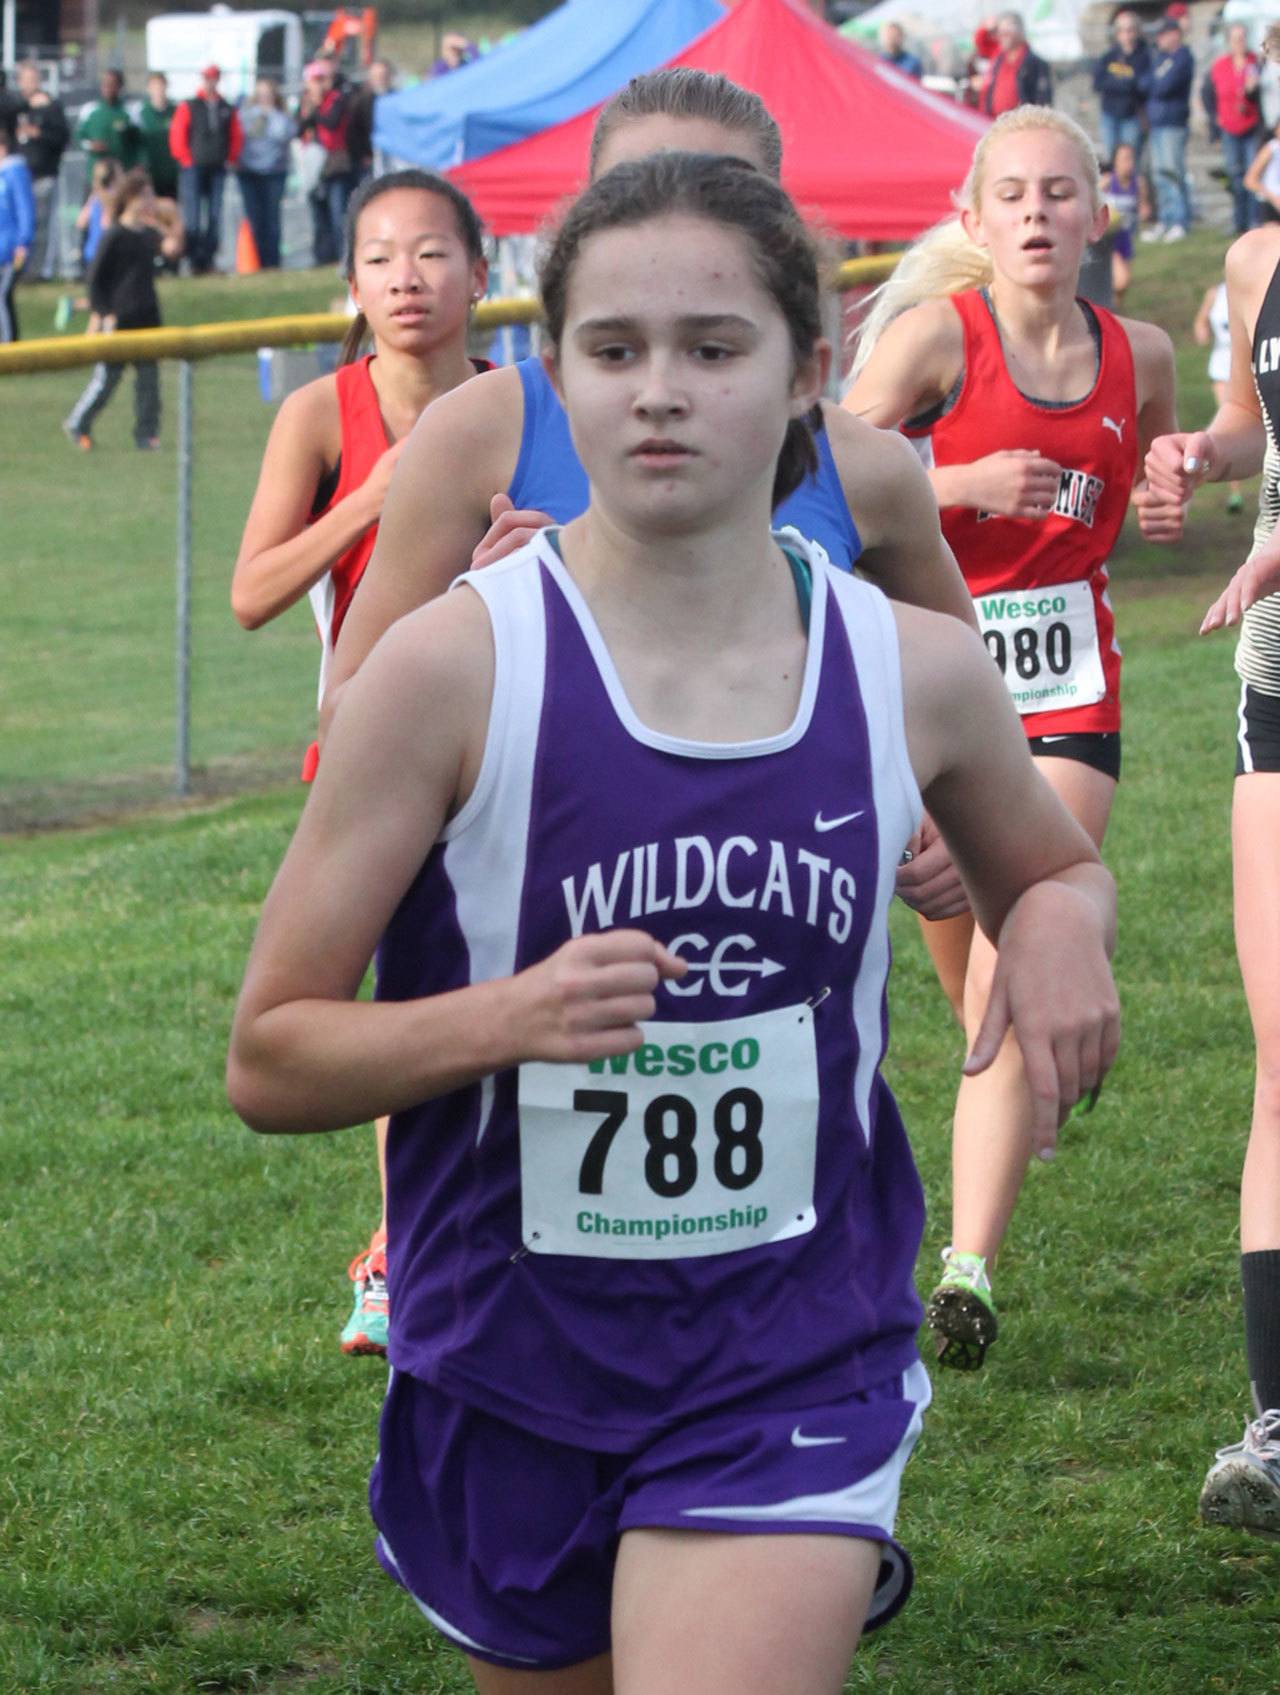 Oak Harbor High School sophomore Alex Smith qualifed for her third Junior Olympics national cross country championship by placing fifth in a regional meet Saturday. (Photo by Jim Waller)